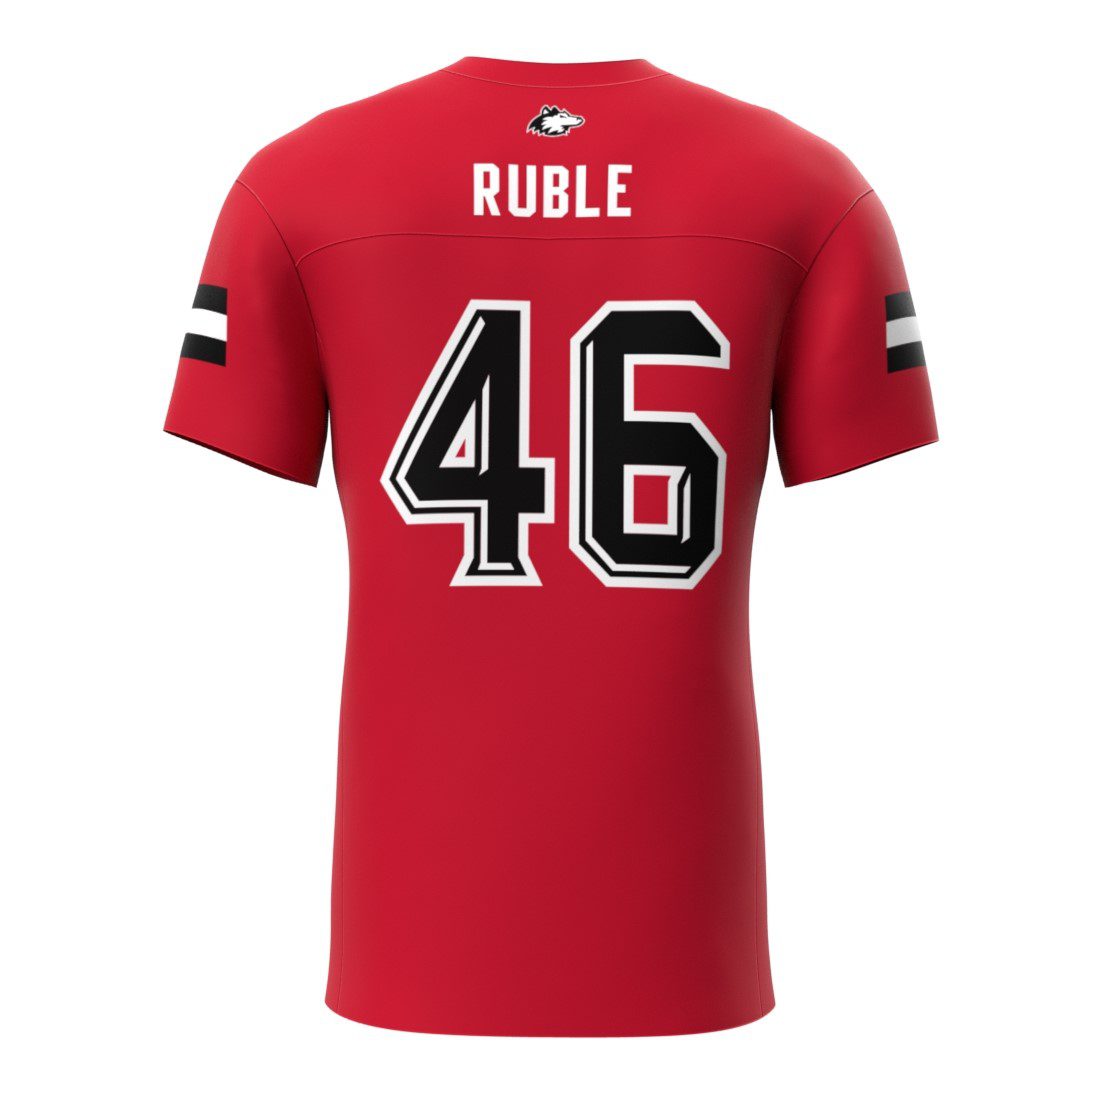 Nathan Ruble NIU Replica Red Jersey Back